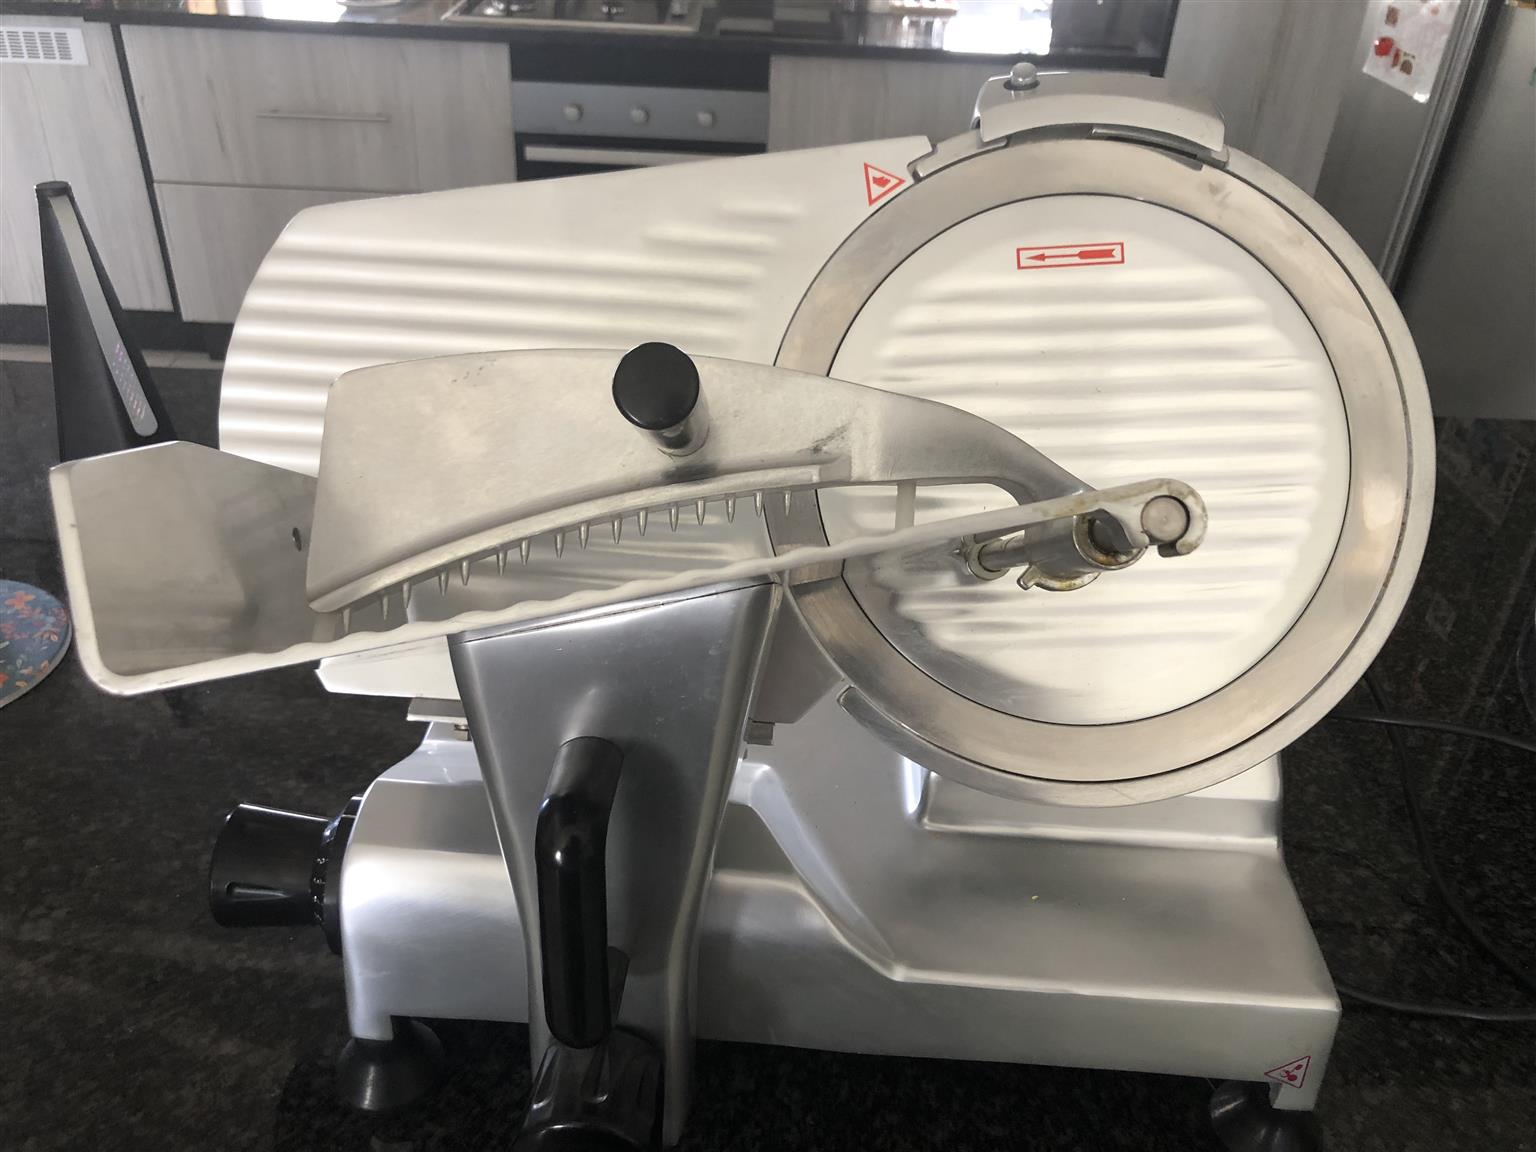 Universal HBS-300 12" Manual Gravity Feed Meat Slicer - 1/2 hp